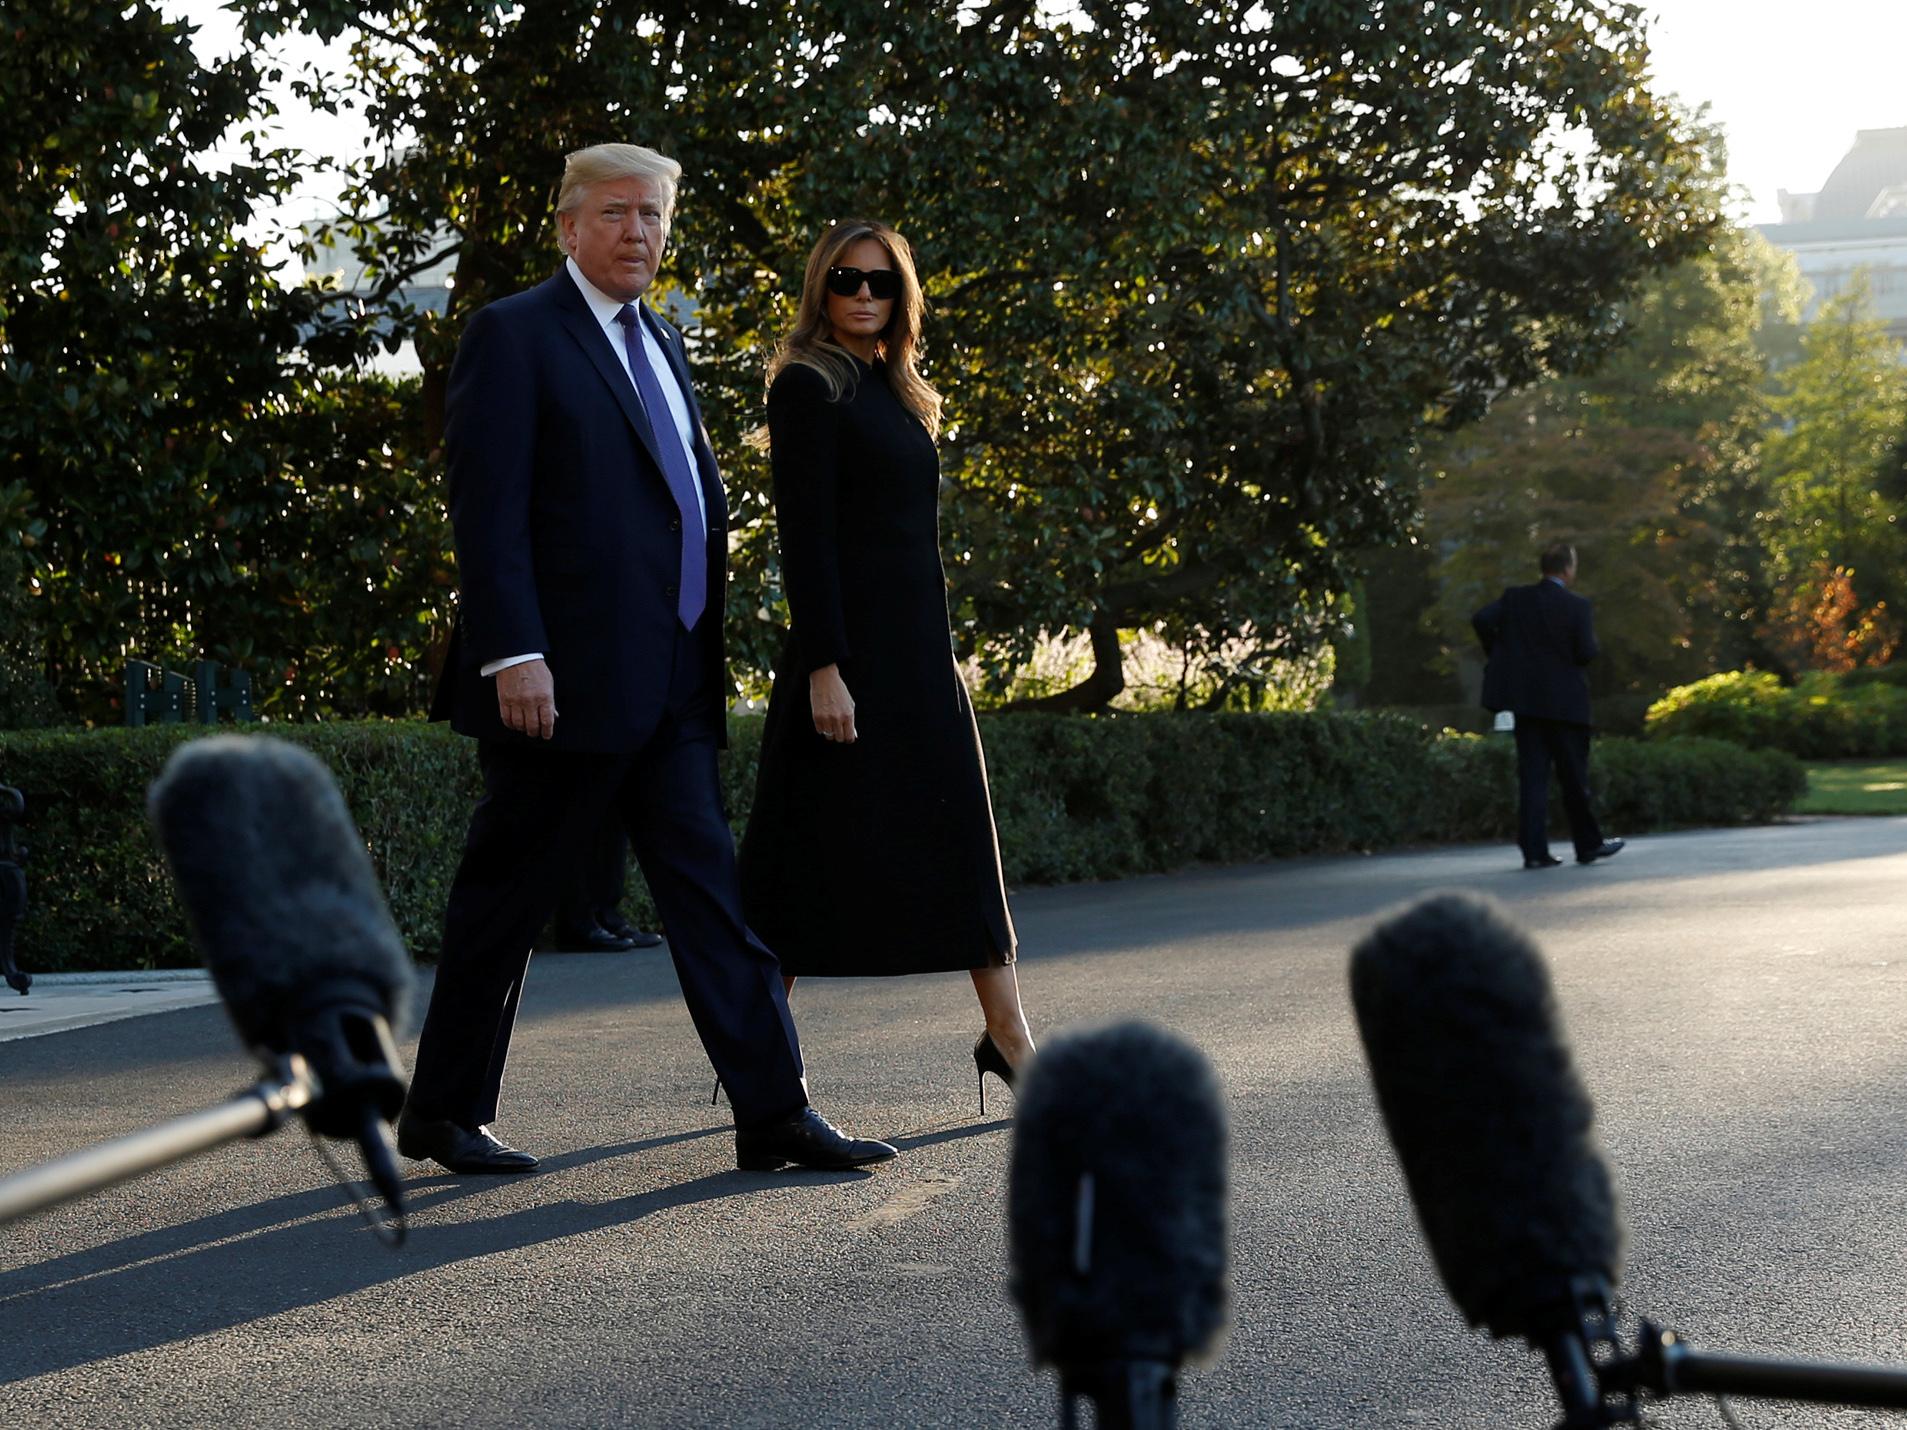 US President Donald Trump and First Lady Melania Trump depart for travel to Las Vegas, in the aftermath of the shooting there, from the South Lawn of the White House in Washington